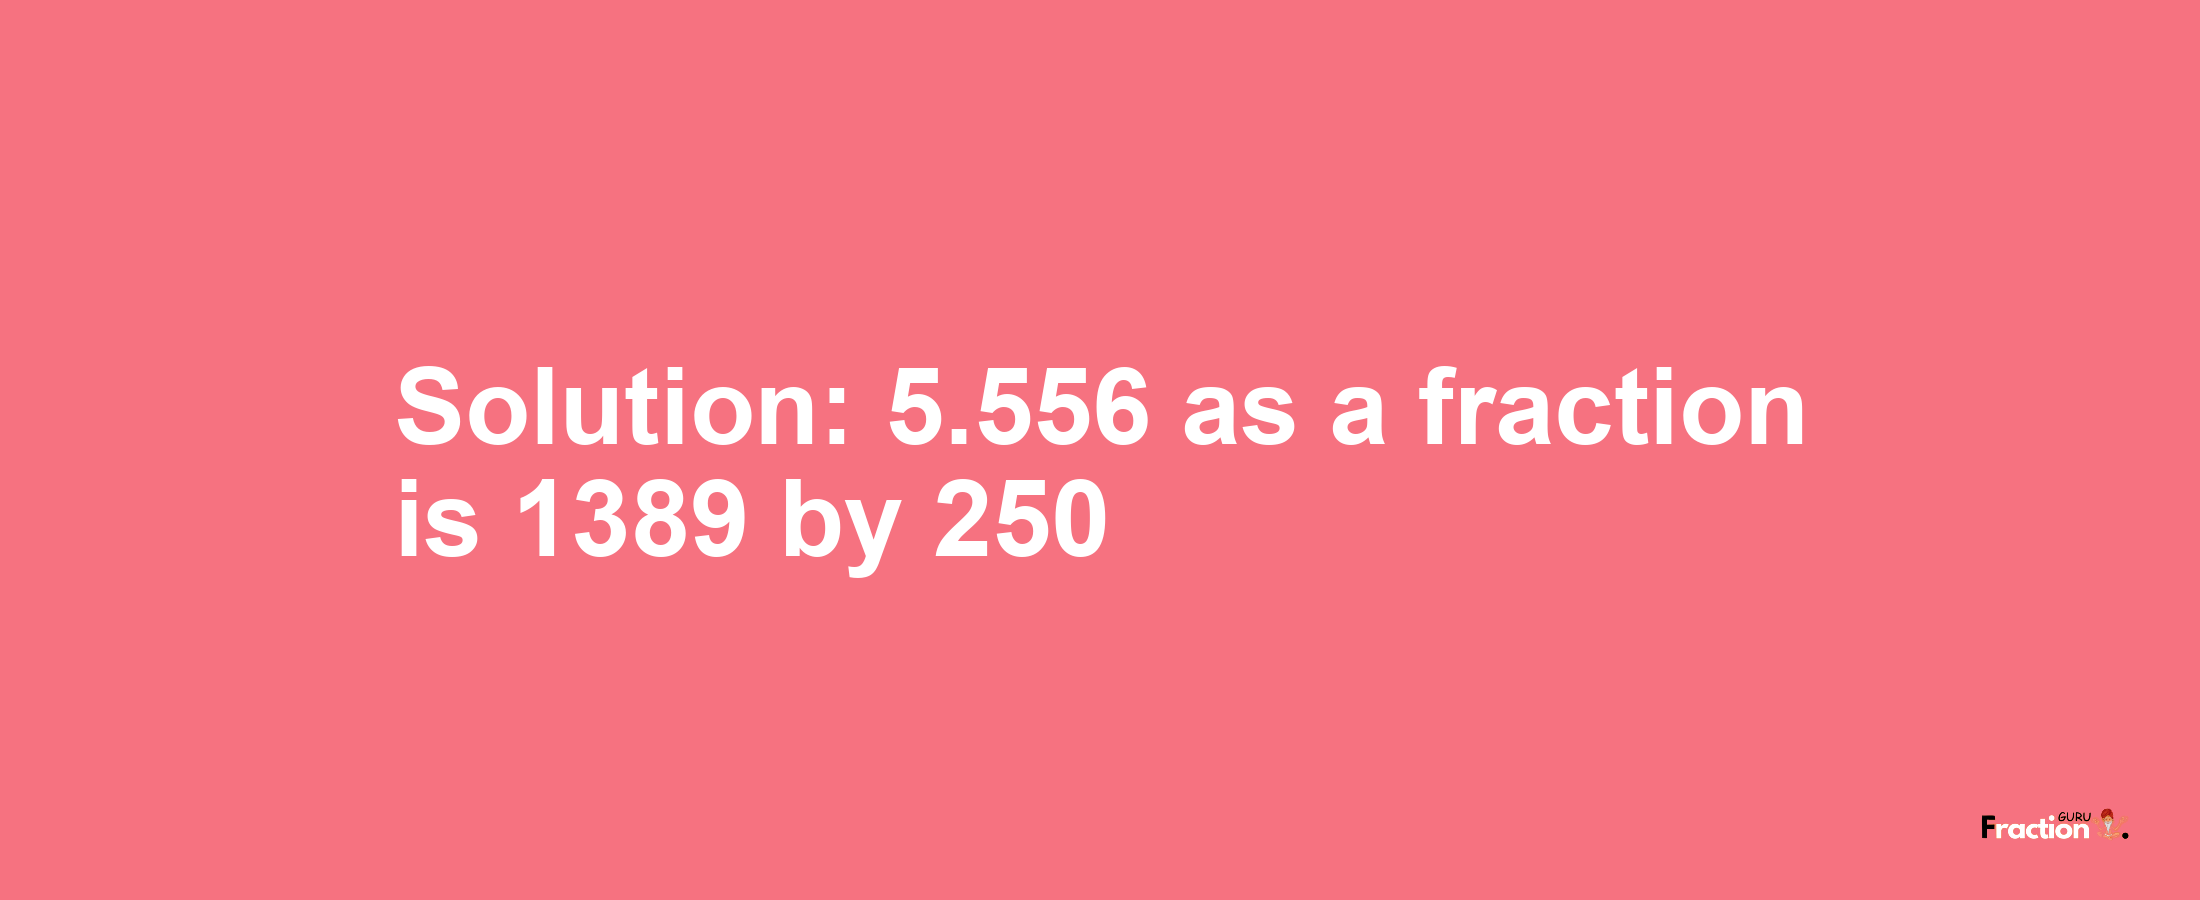 Solution:5.556 as a fraction is 1389/250